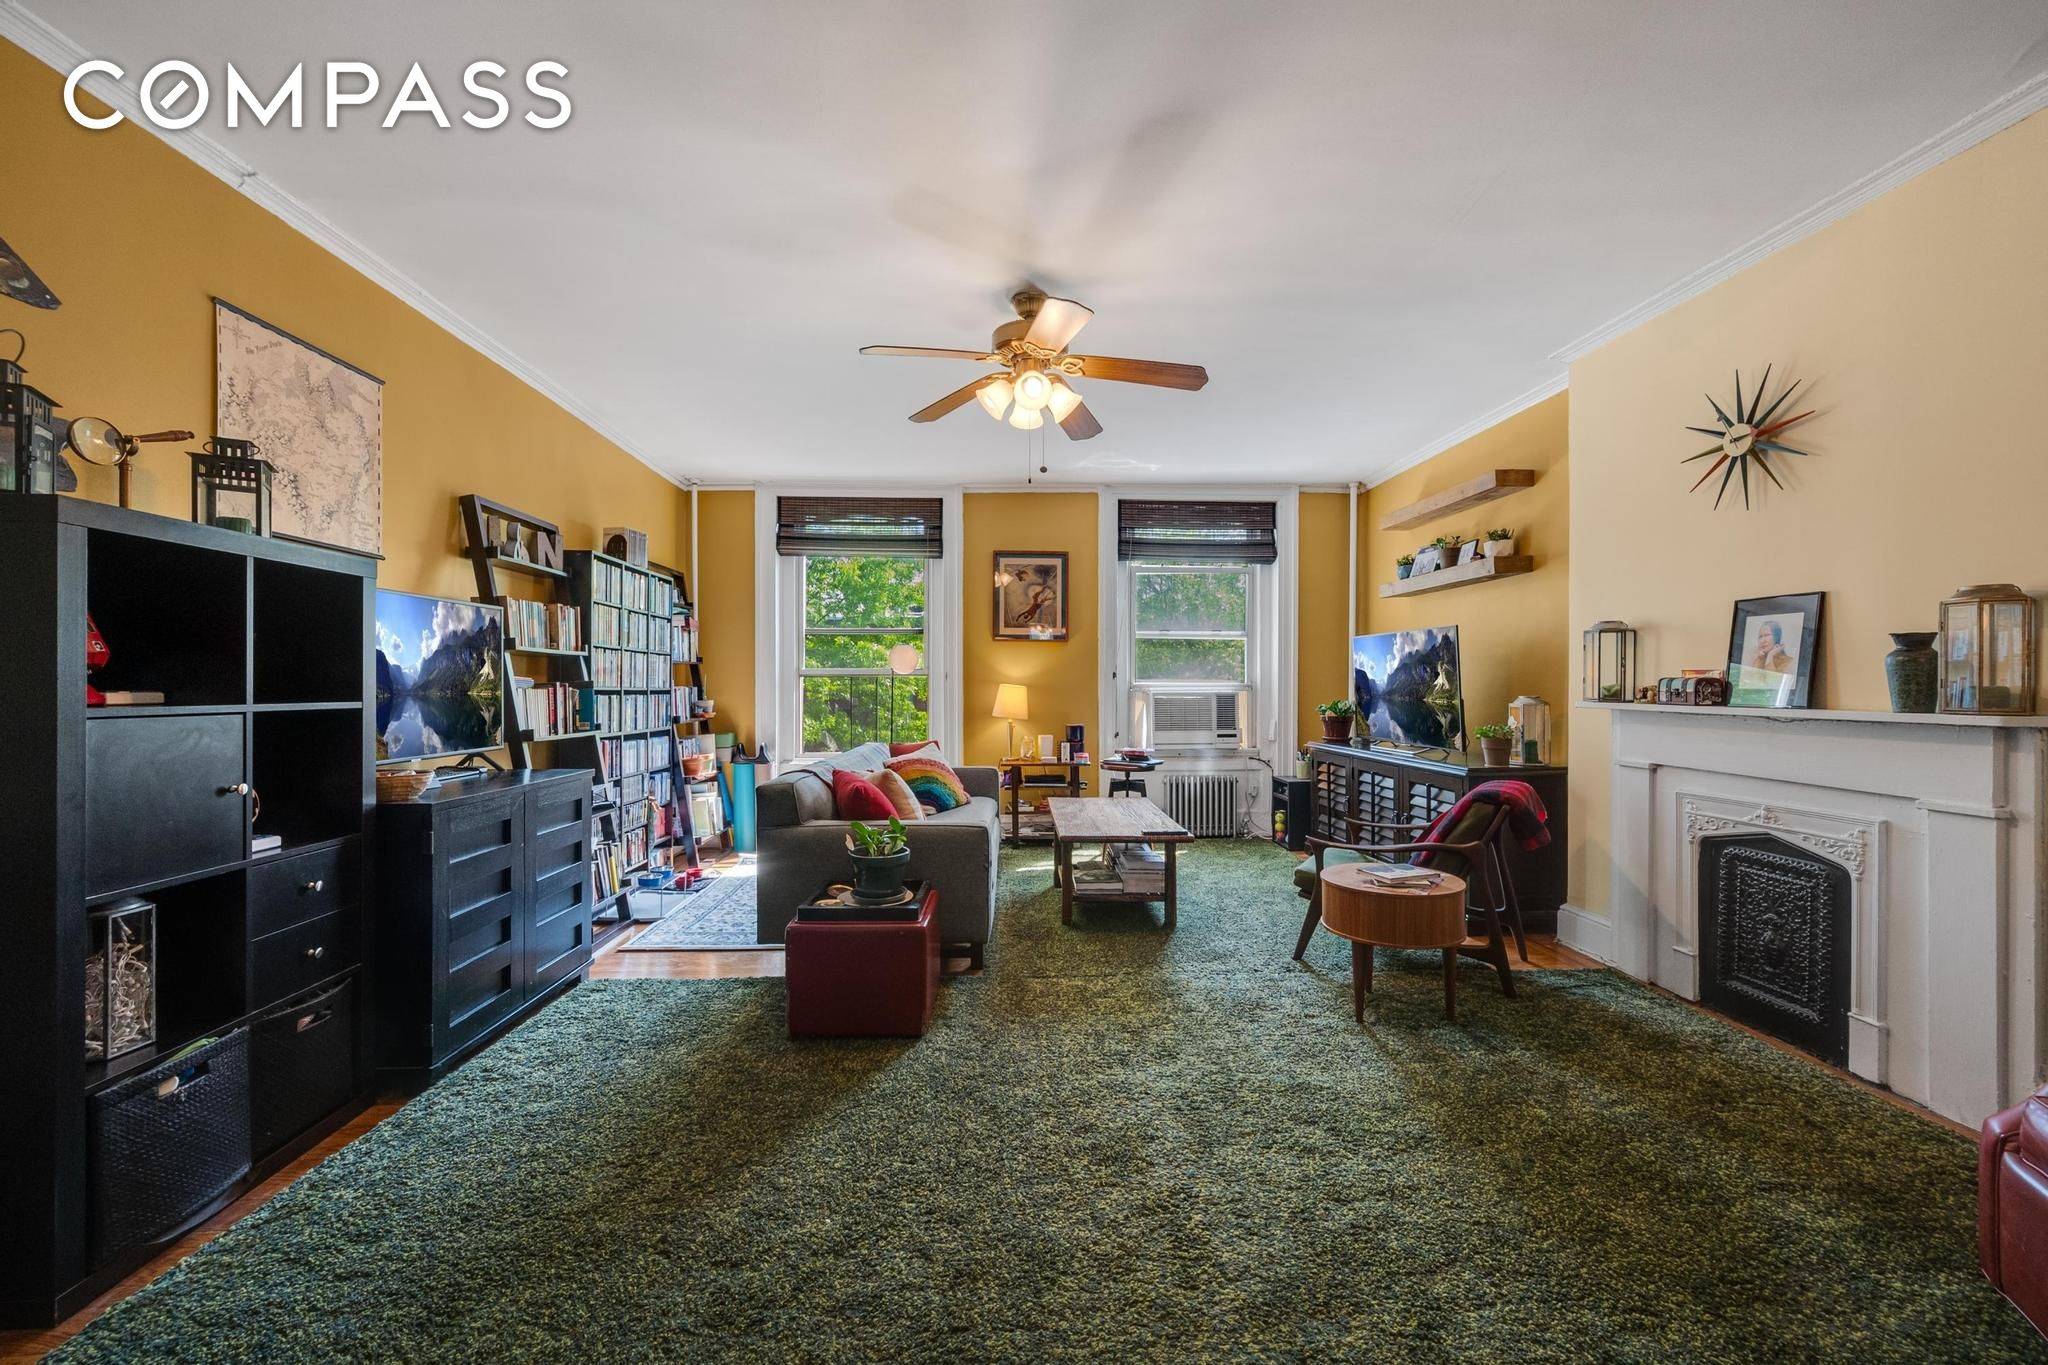 Welcome to 136 Amity St. This located on one of the best blocks in Cobble Hill.